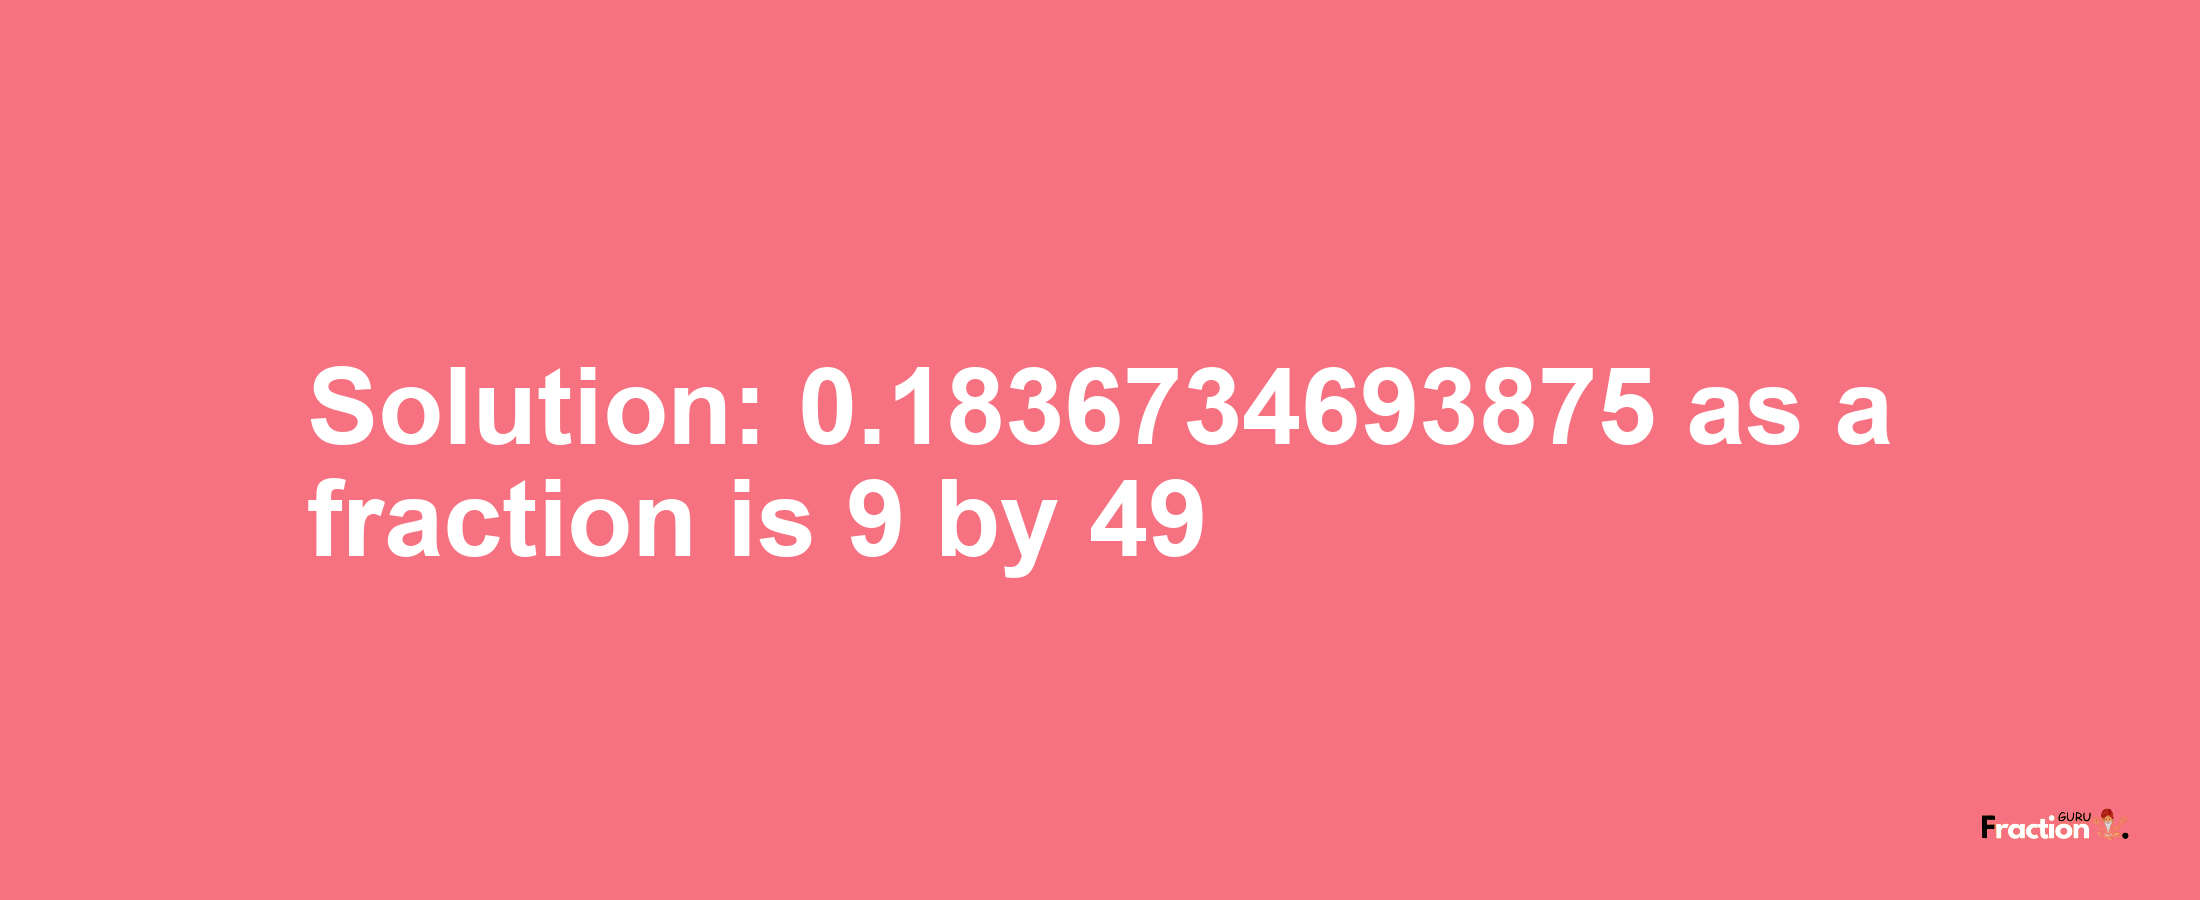 Solution:0.1836734693875 as a fraction is 9/49